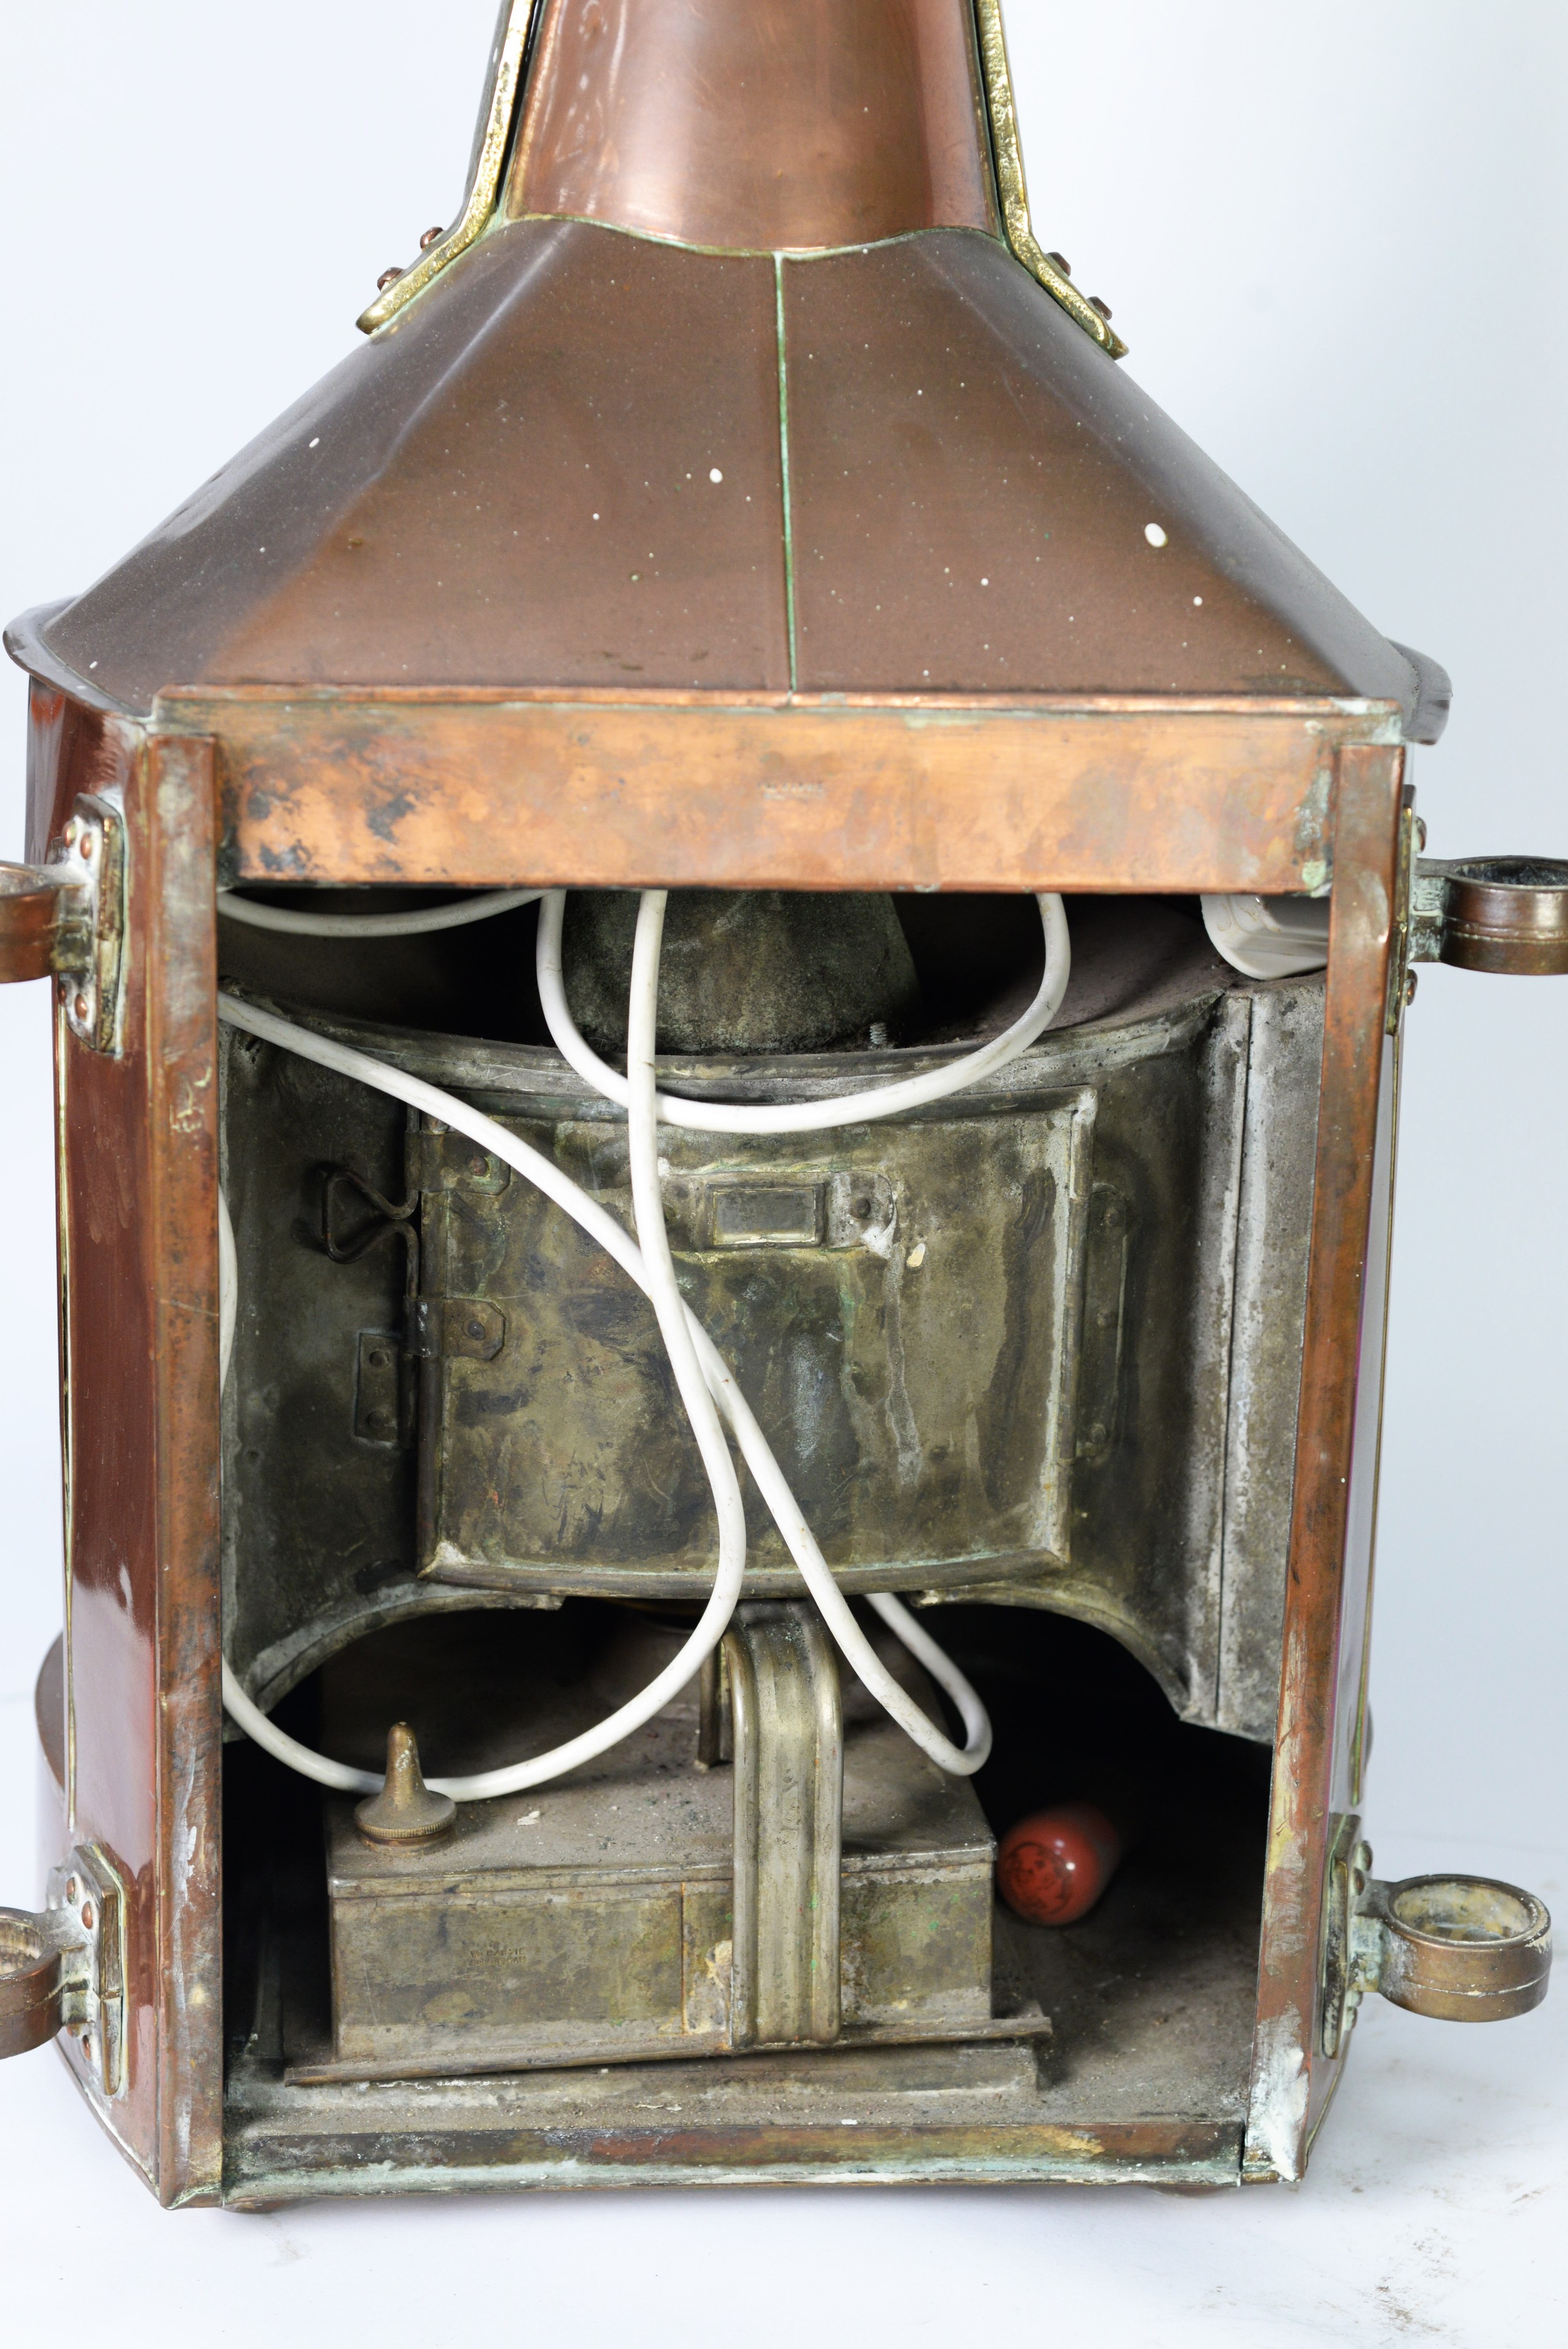 MARITIME INTEREST: three 20th century copper mast lamps, including a central lamp, port side lamp, - Image 8 of 8